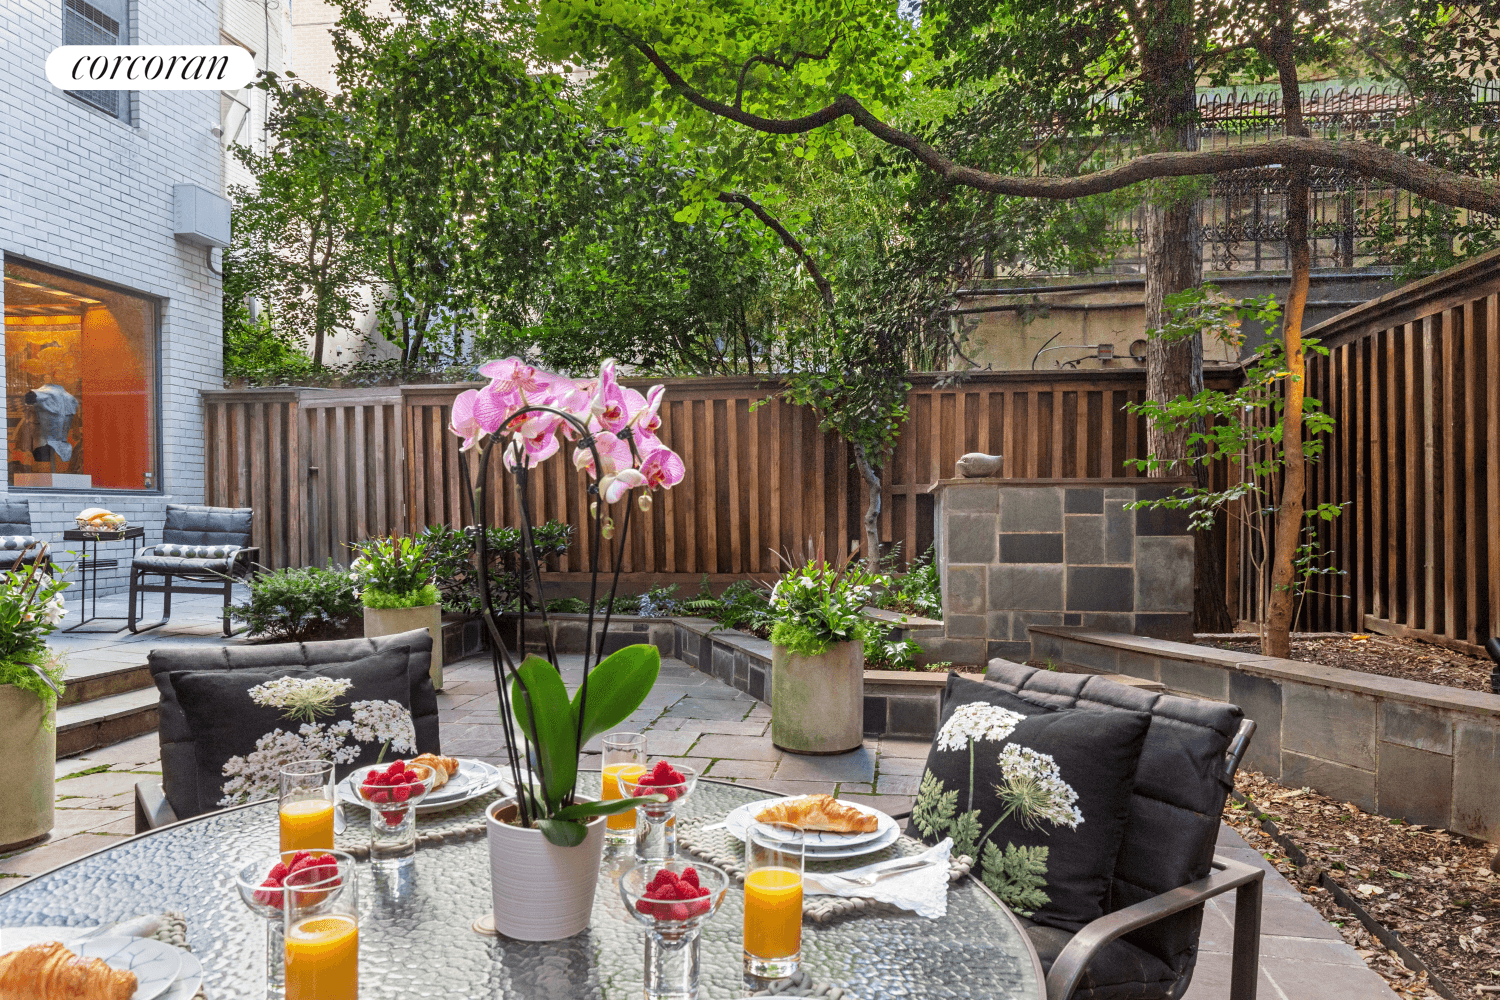 812 Fifth Avenue is an exceptional duplex Maisonette offering the luxury of a Fifth Avenue cooperative combined with the indoor and outdoor space of a townhouse.